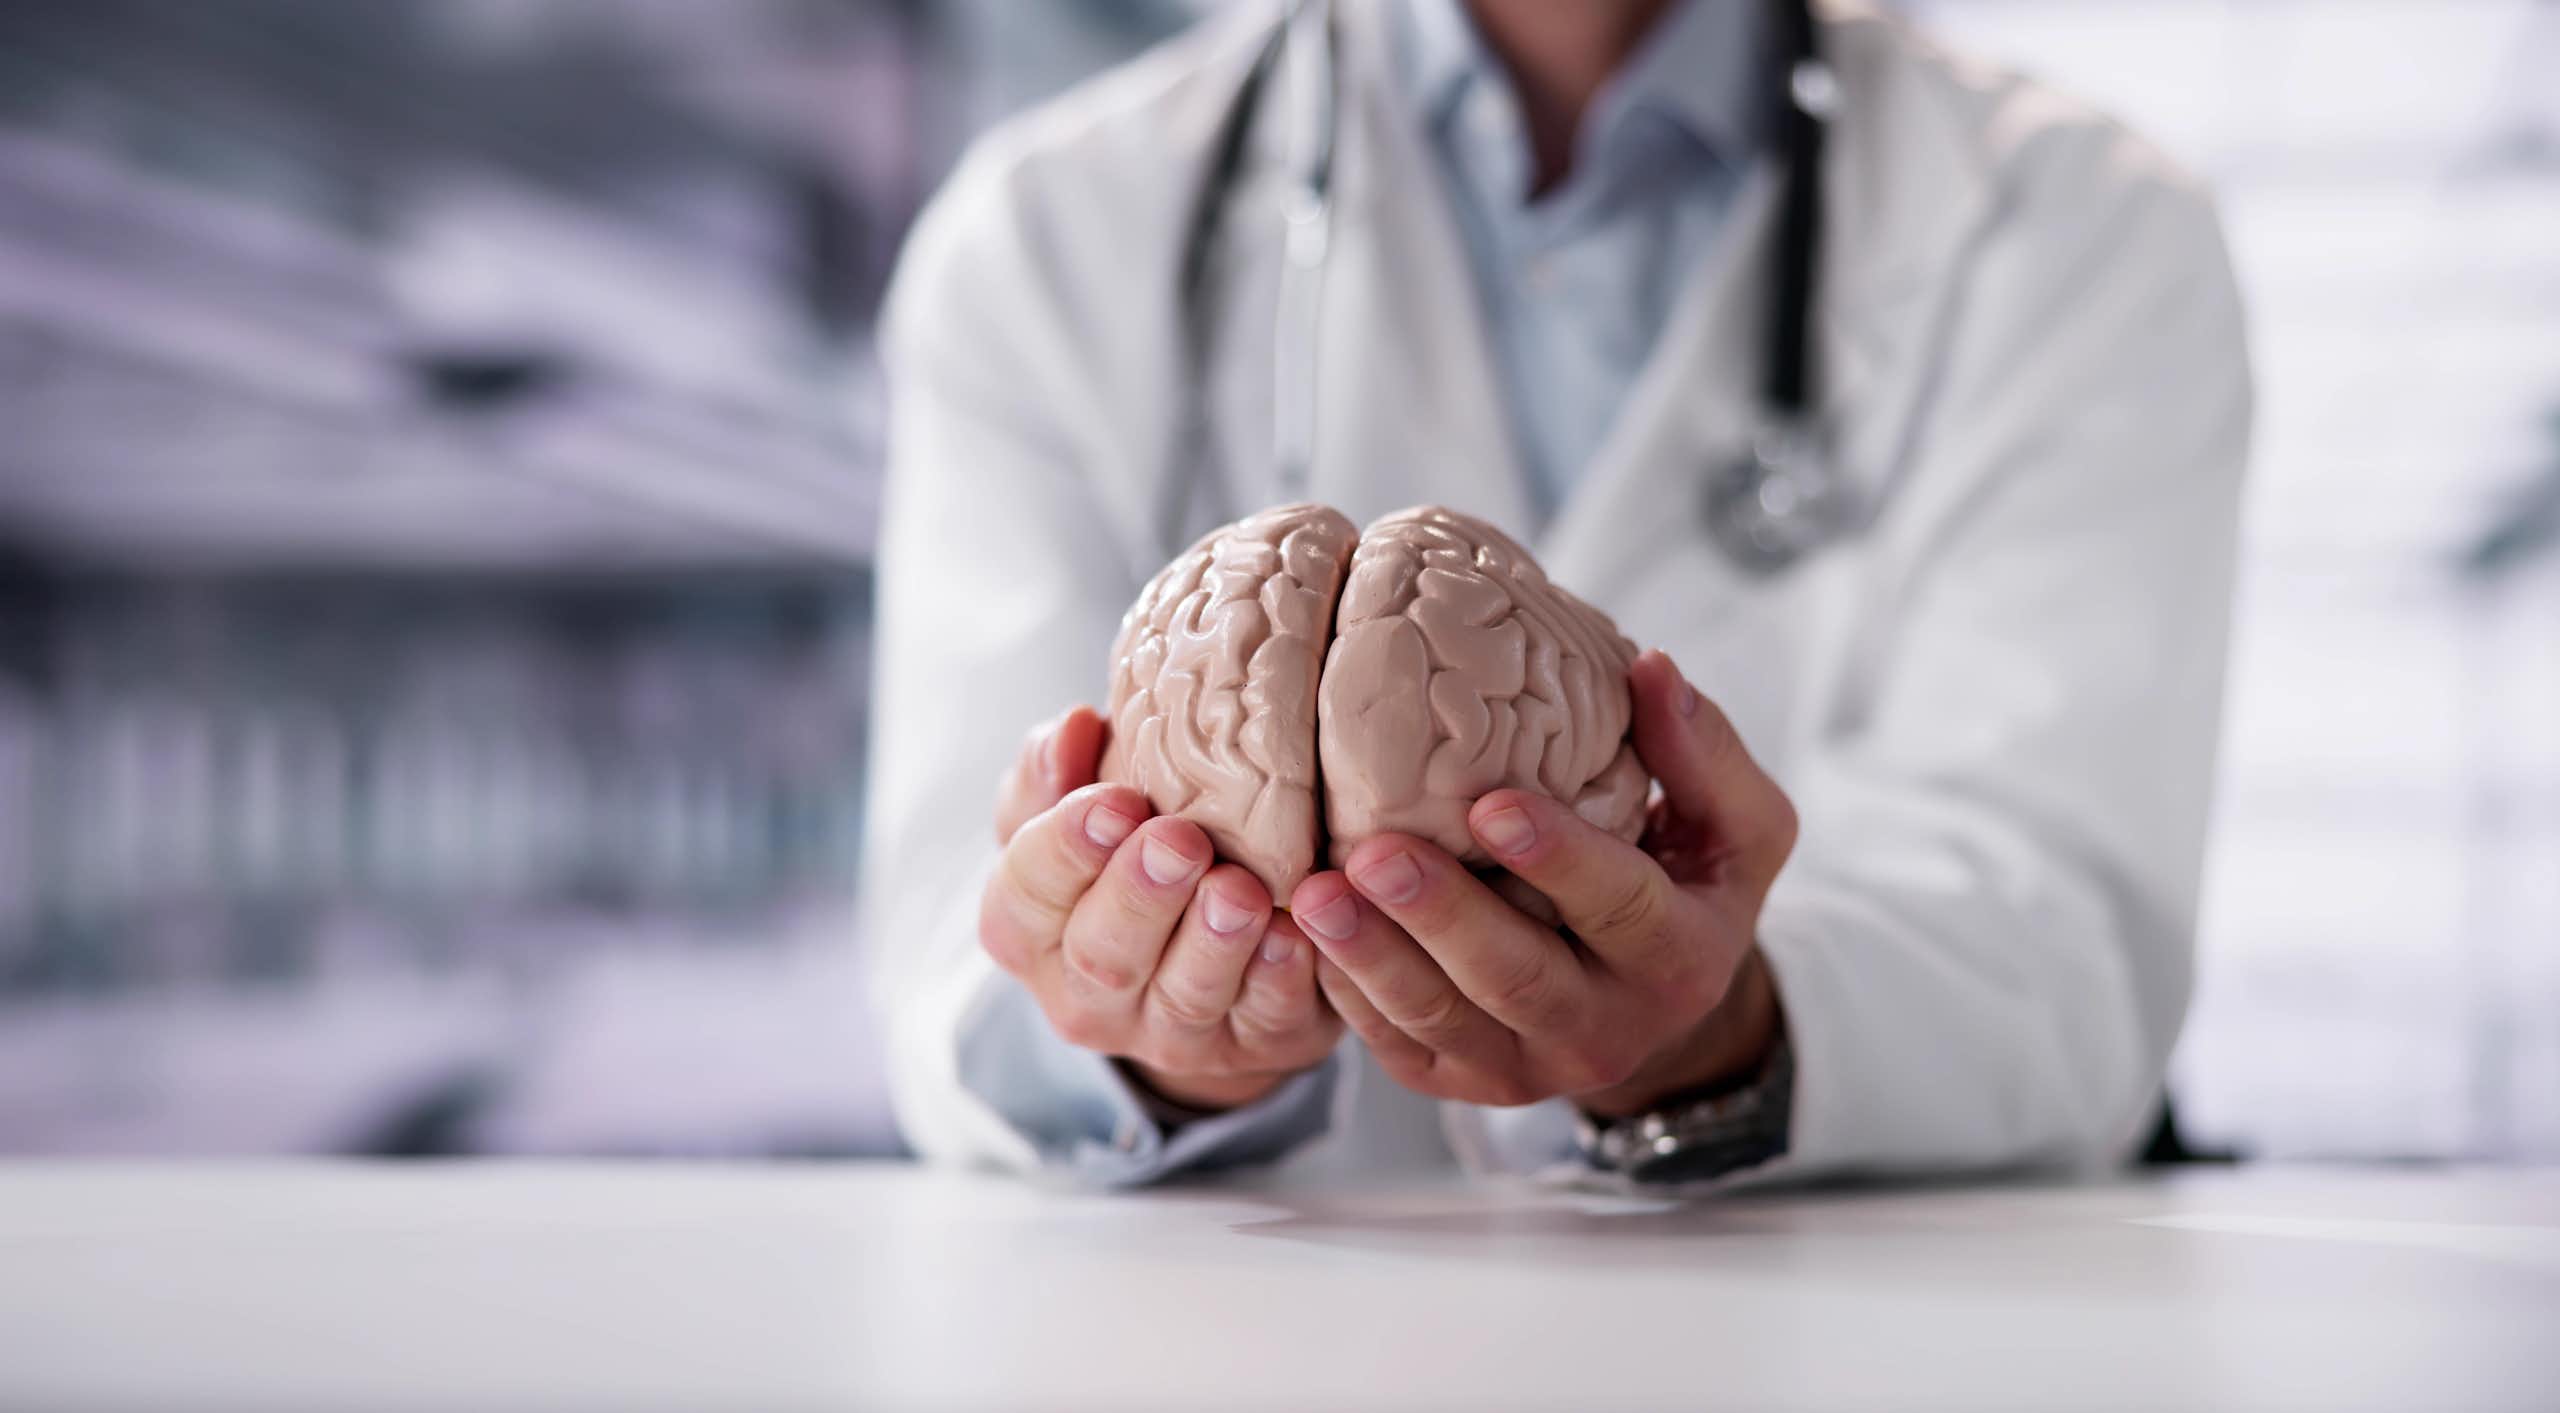 A person in a white lab coat holding a model of a brain